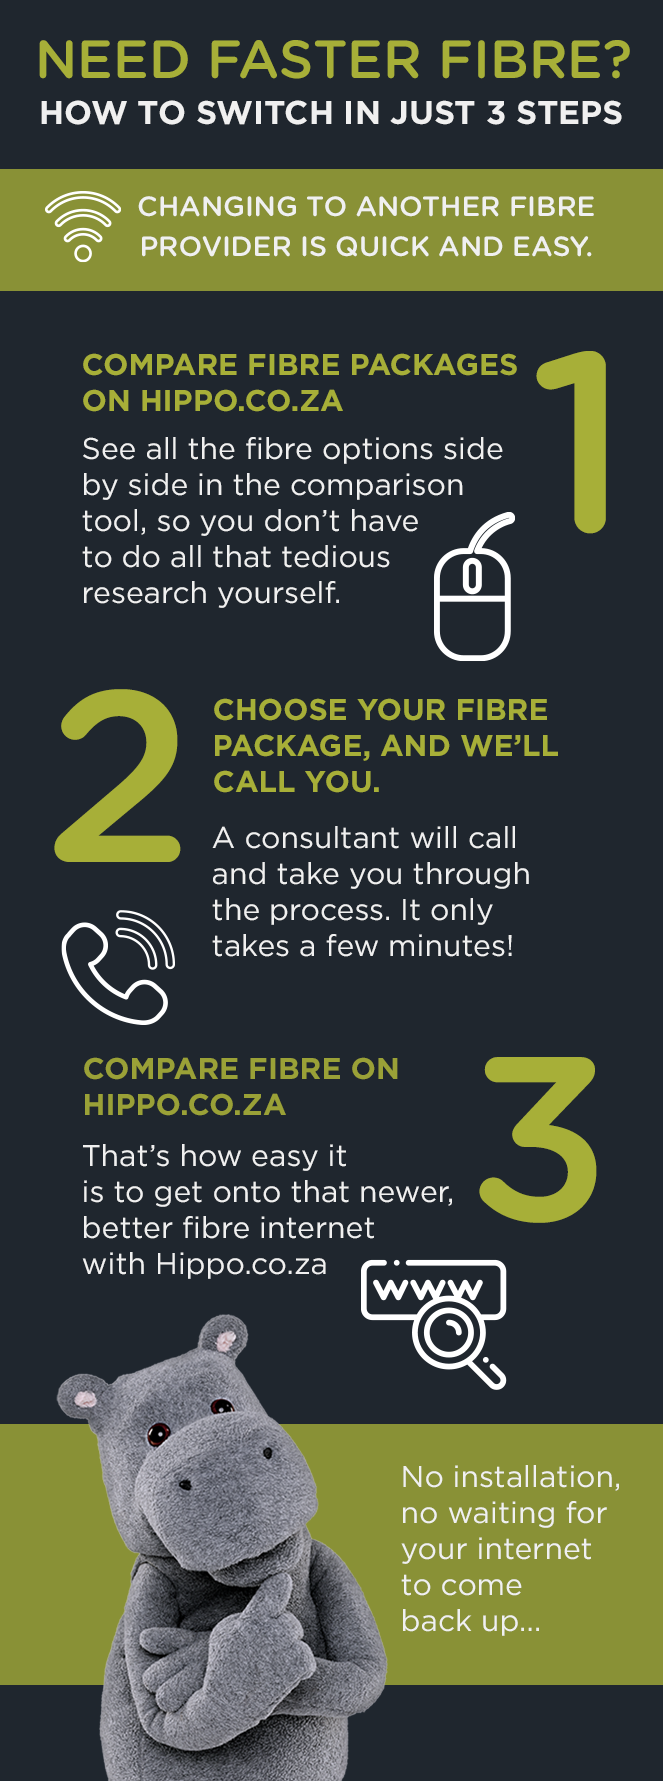 infographic on how to switch fibre providers using the Hippo.co.za comparison tool